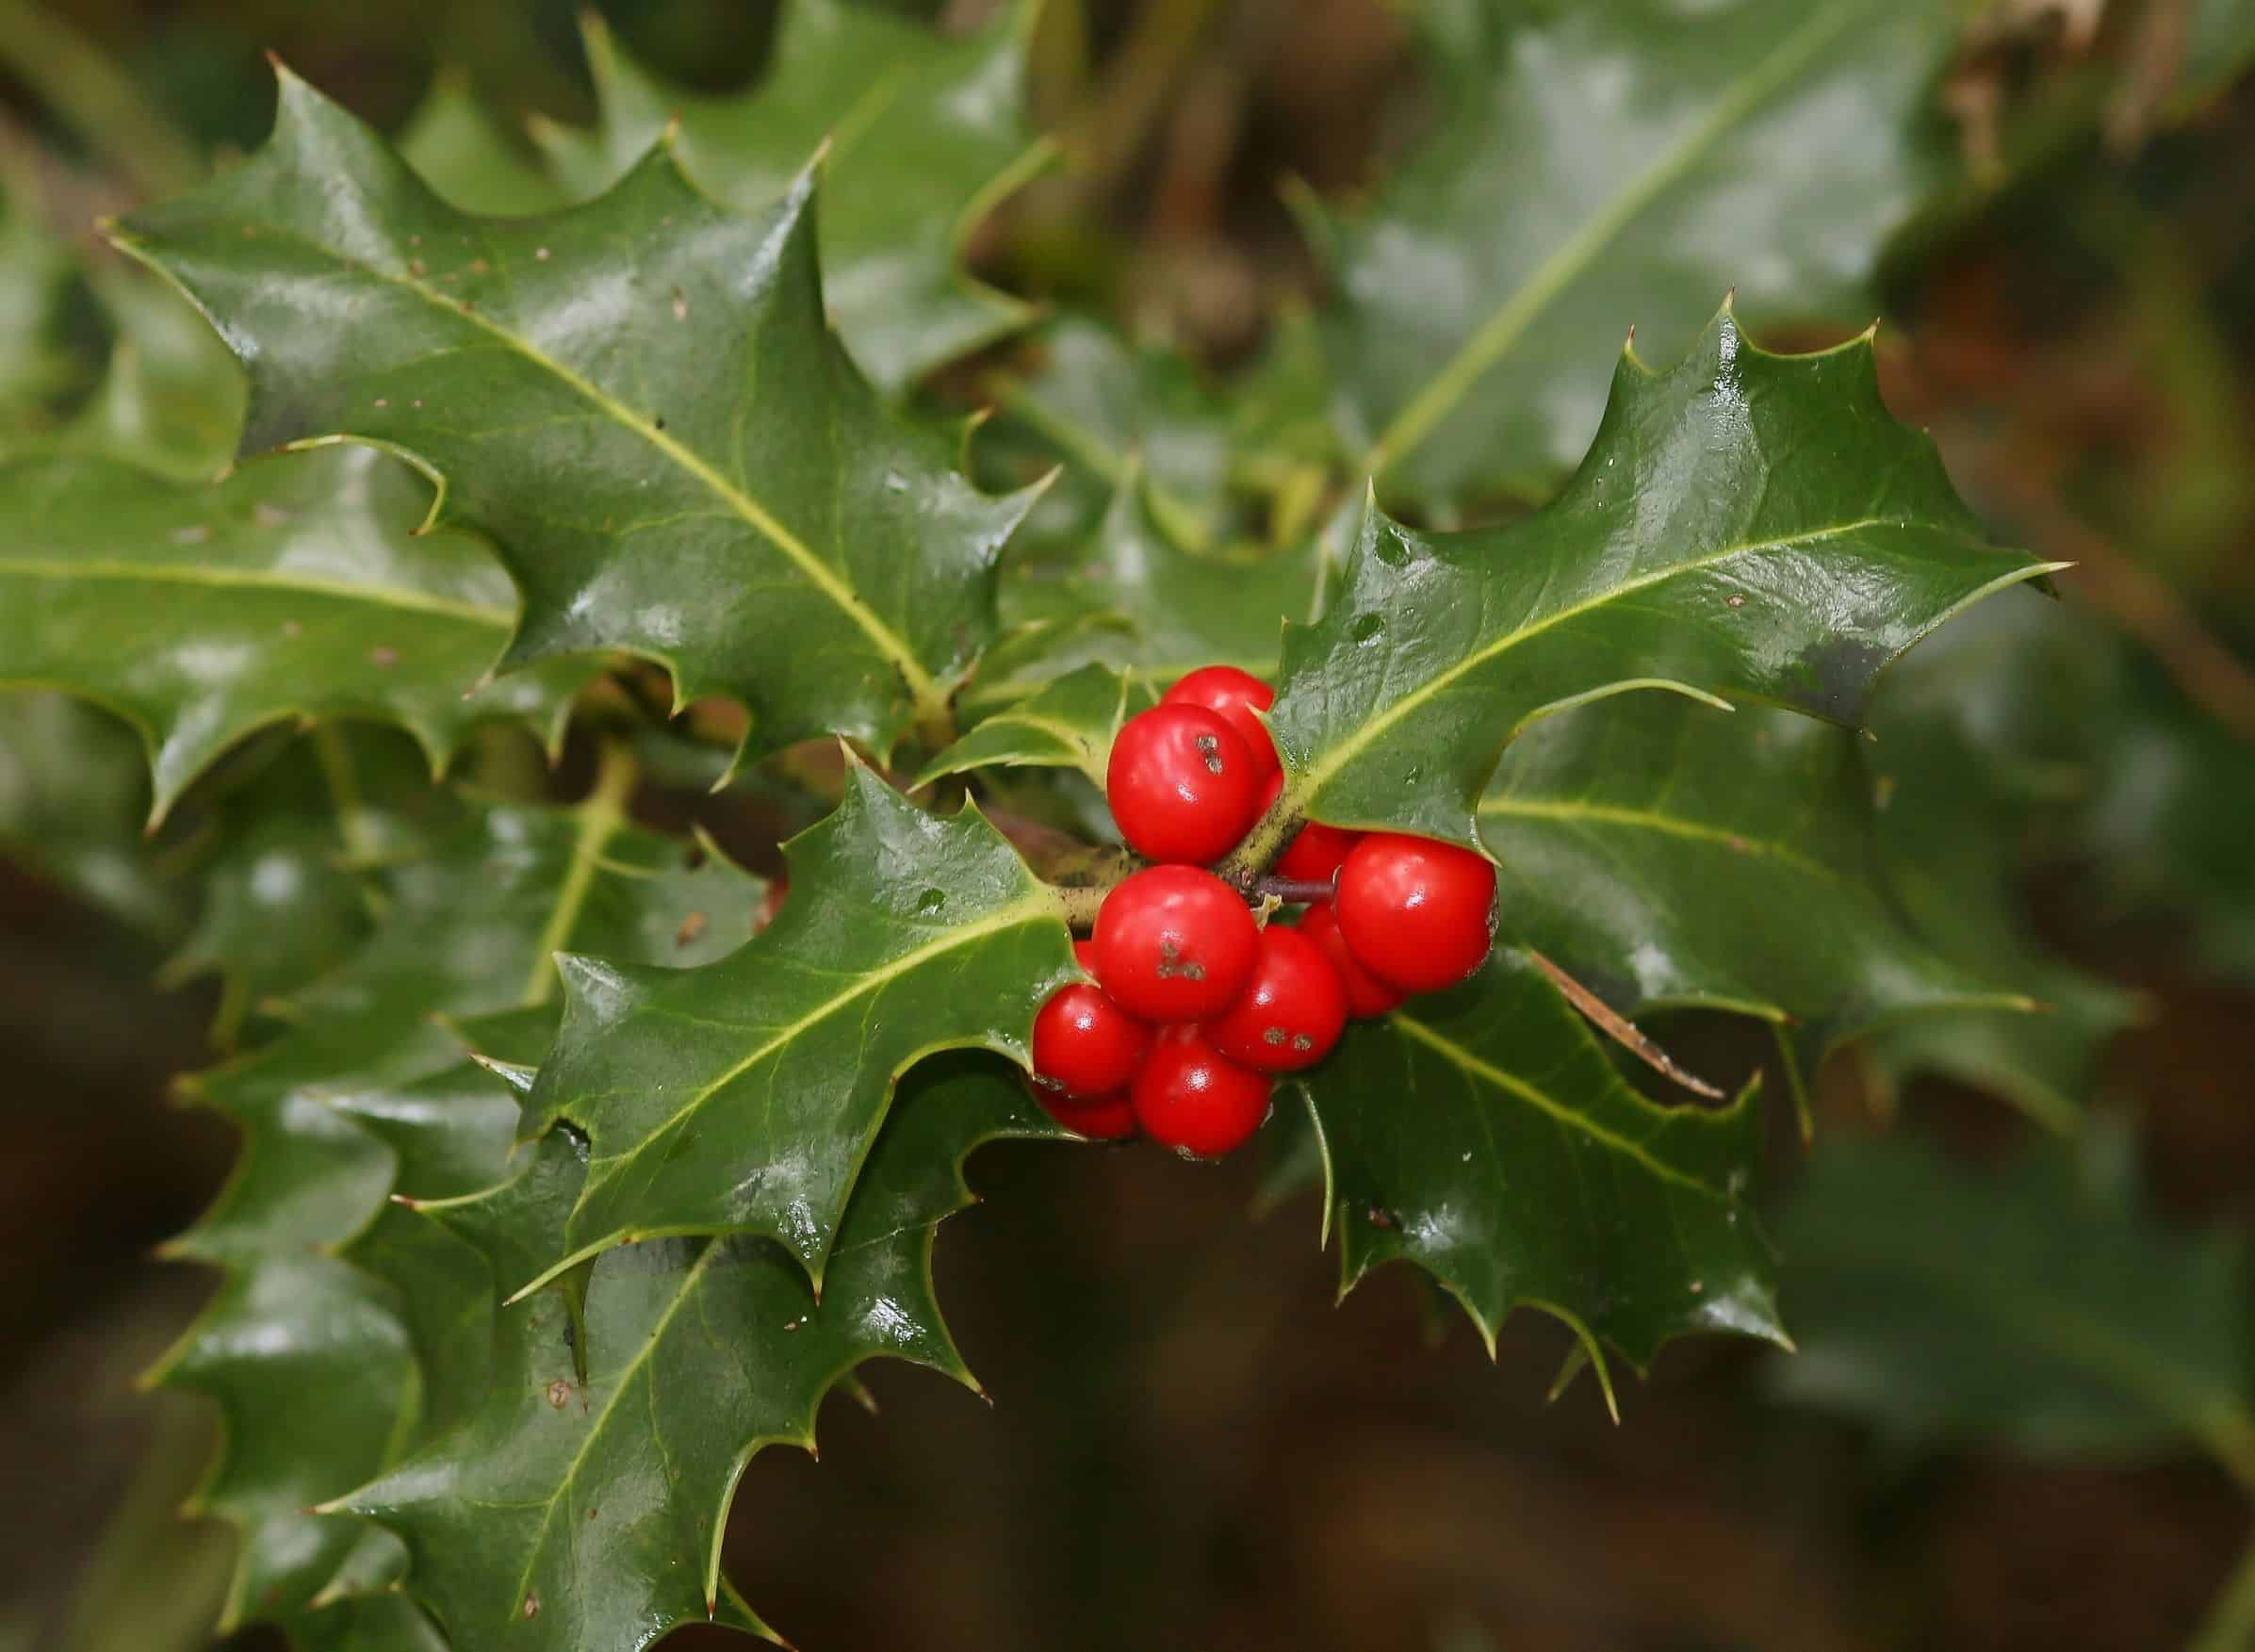 Common holly is typically associated with Christmas.